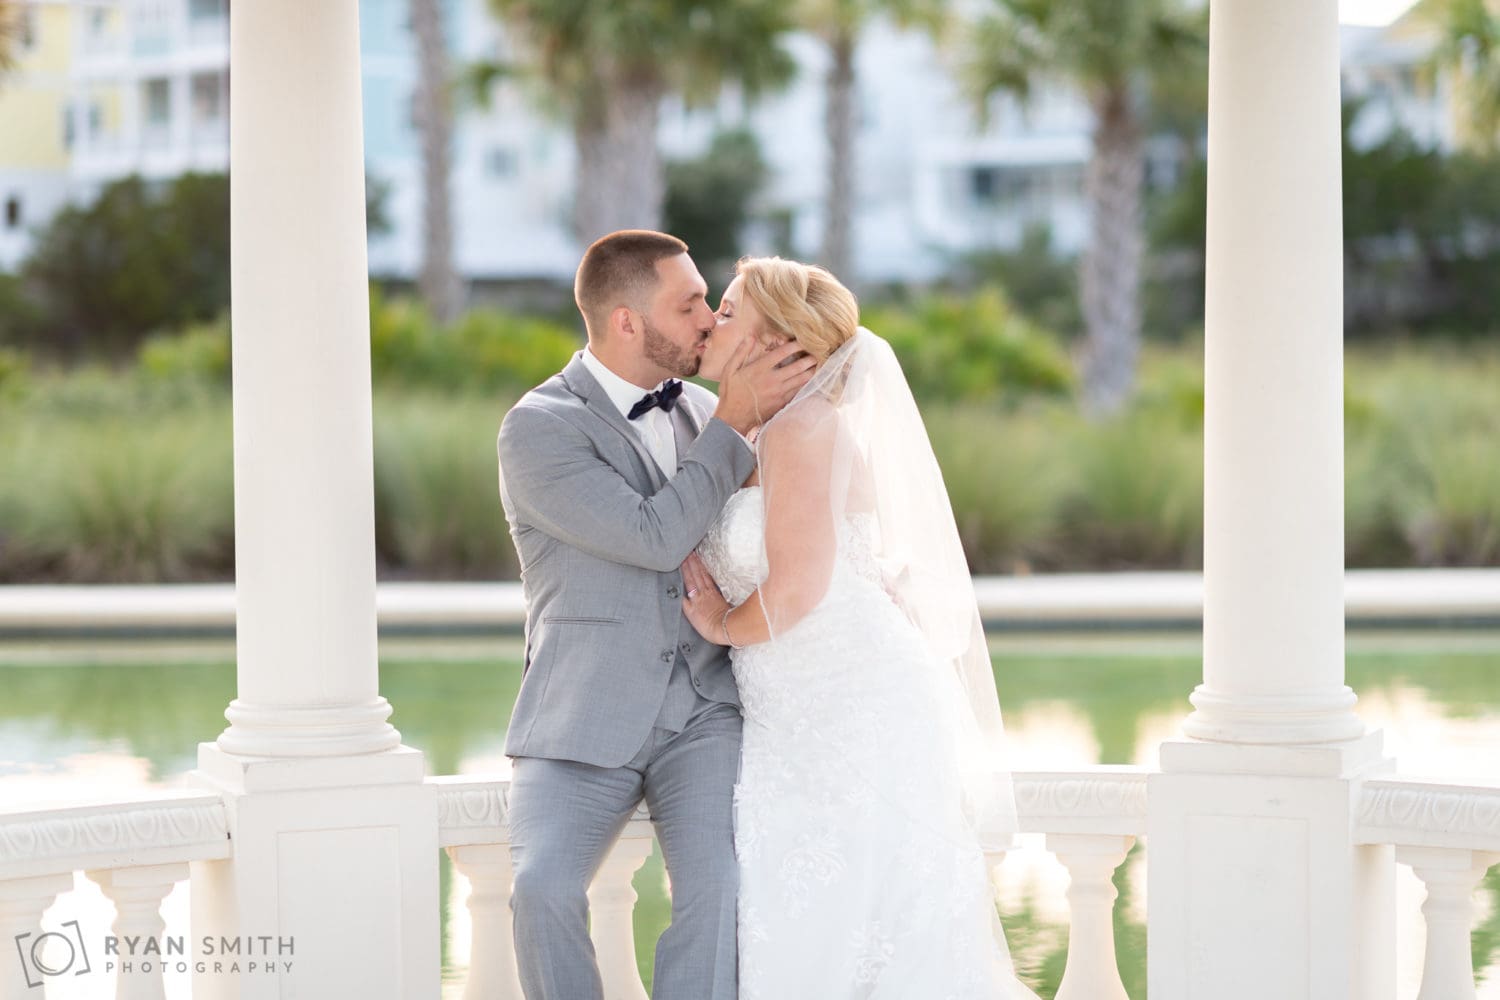 Bride and groom portraits in the gazebo   - 21 Main Events - North Myrtle Beach